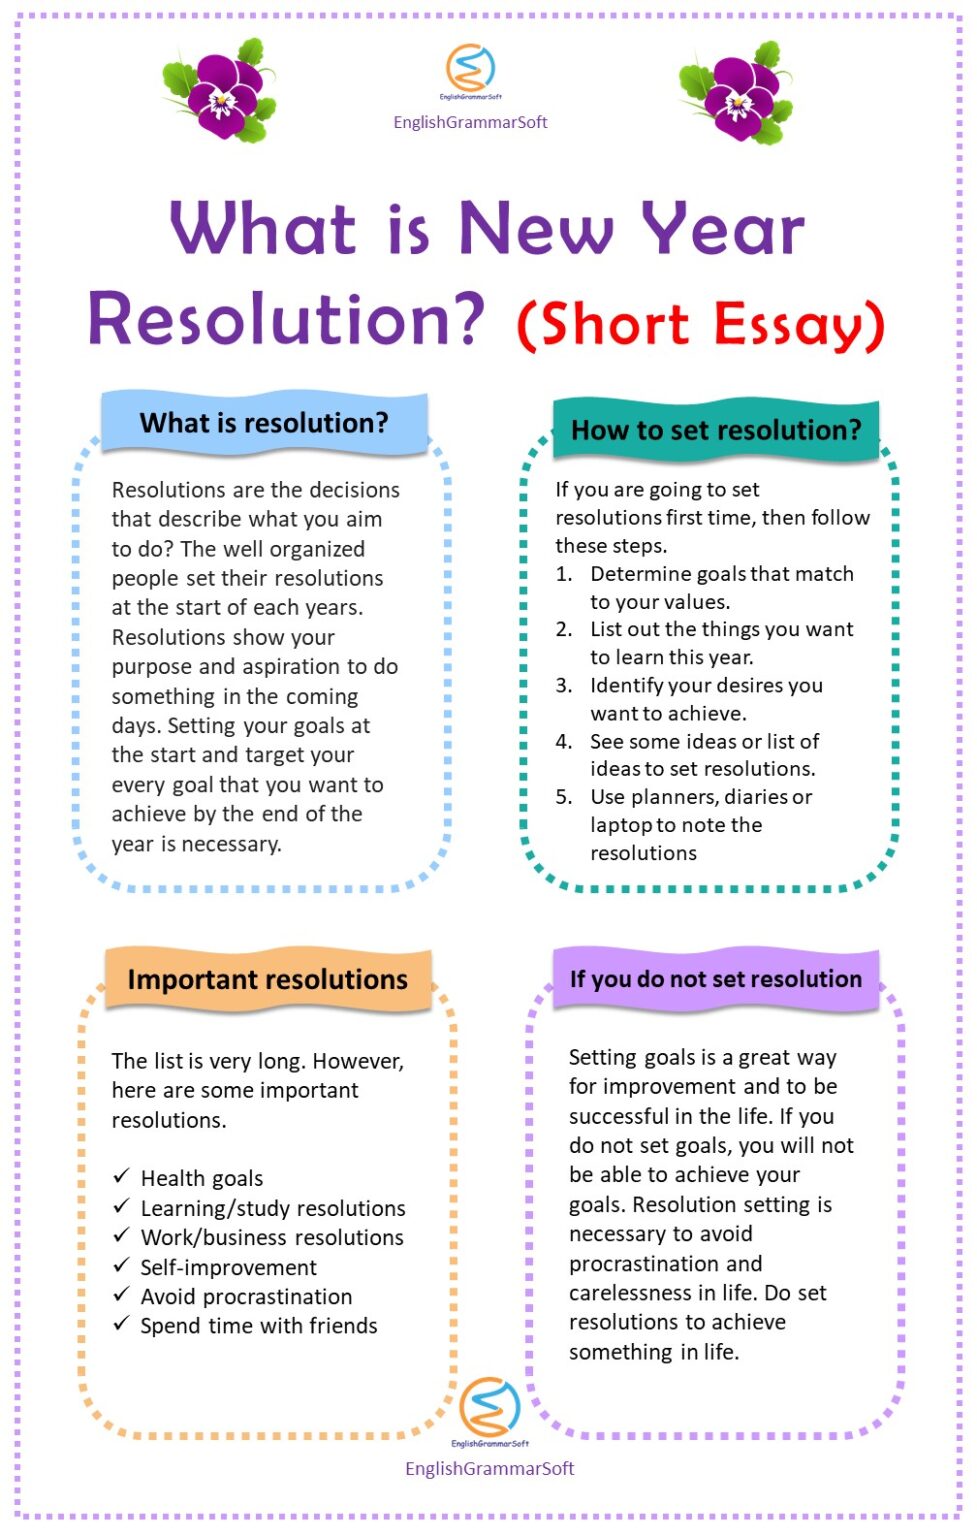 new year resolution essay as a student